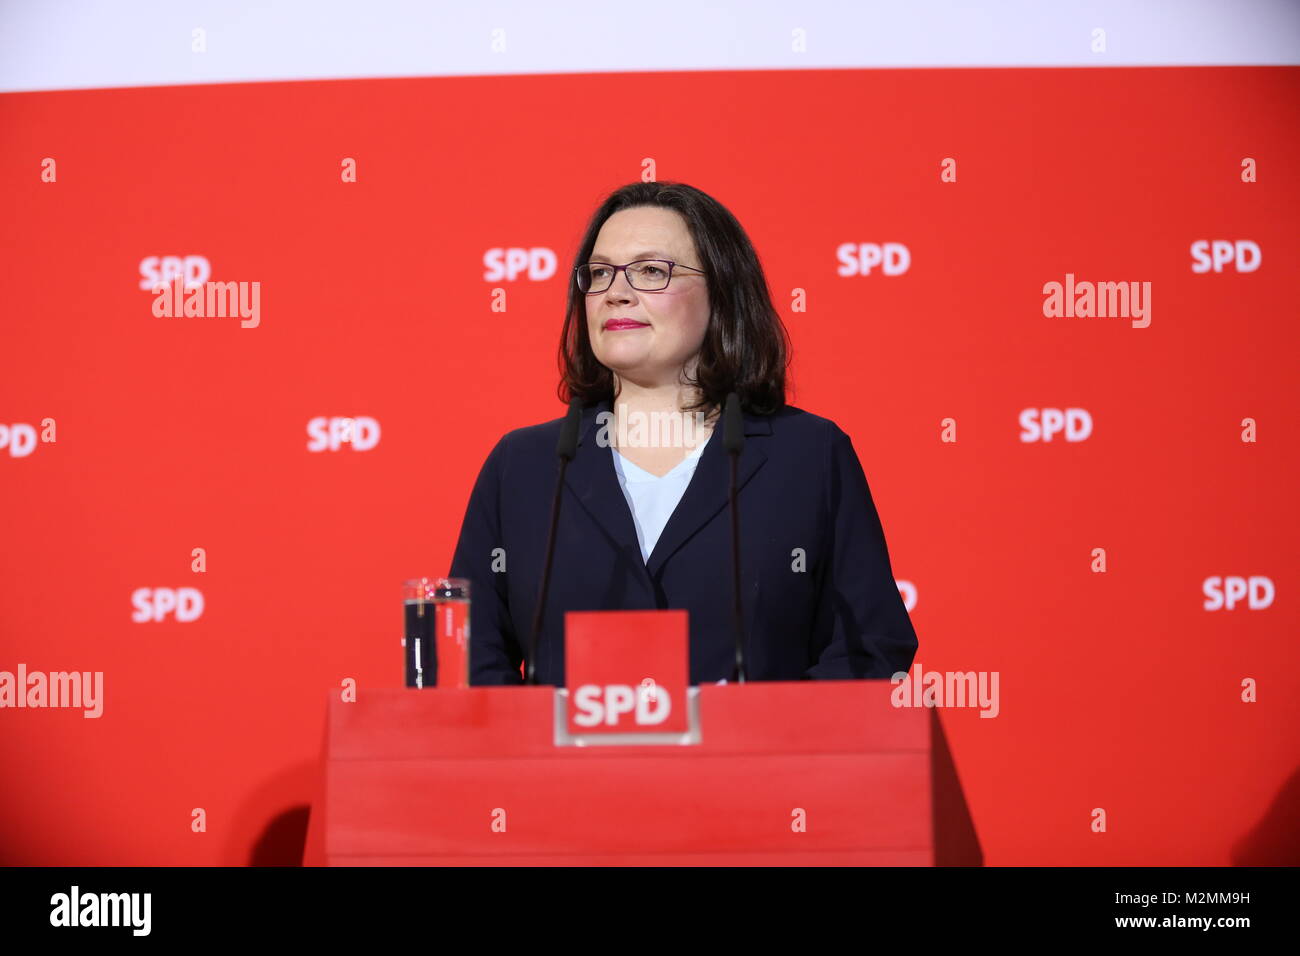 Berlin, Germany. 07th Feb, 2018. SPD leader Martin Schulz hands over the party chairmanship to parliamentary leader Andreas Nahles. Andrea Nahles would be the first woman at the head of the SPD party. Among other things, Martin Schulz explained that he wants to become foreign minister in a new grand coalition and that a process of renewal is necessary within the SPD party. The photo shows Andrea Nahles Credit: Simone Kuhlmey/Pacific Press/Alamy Live News Stock Photo